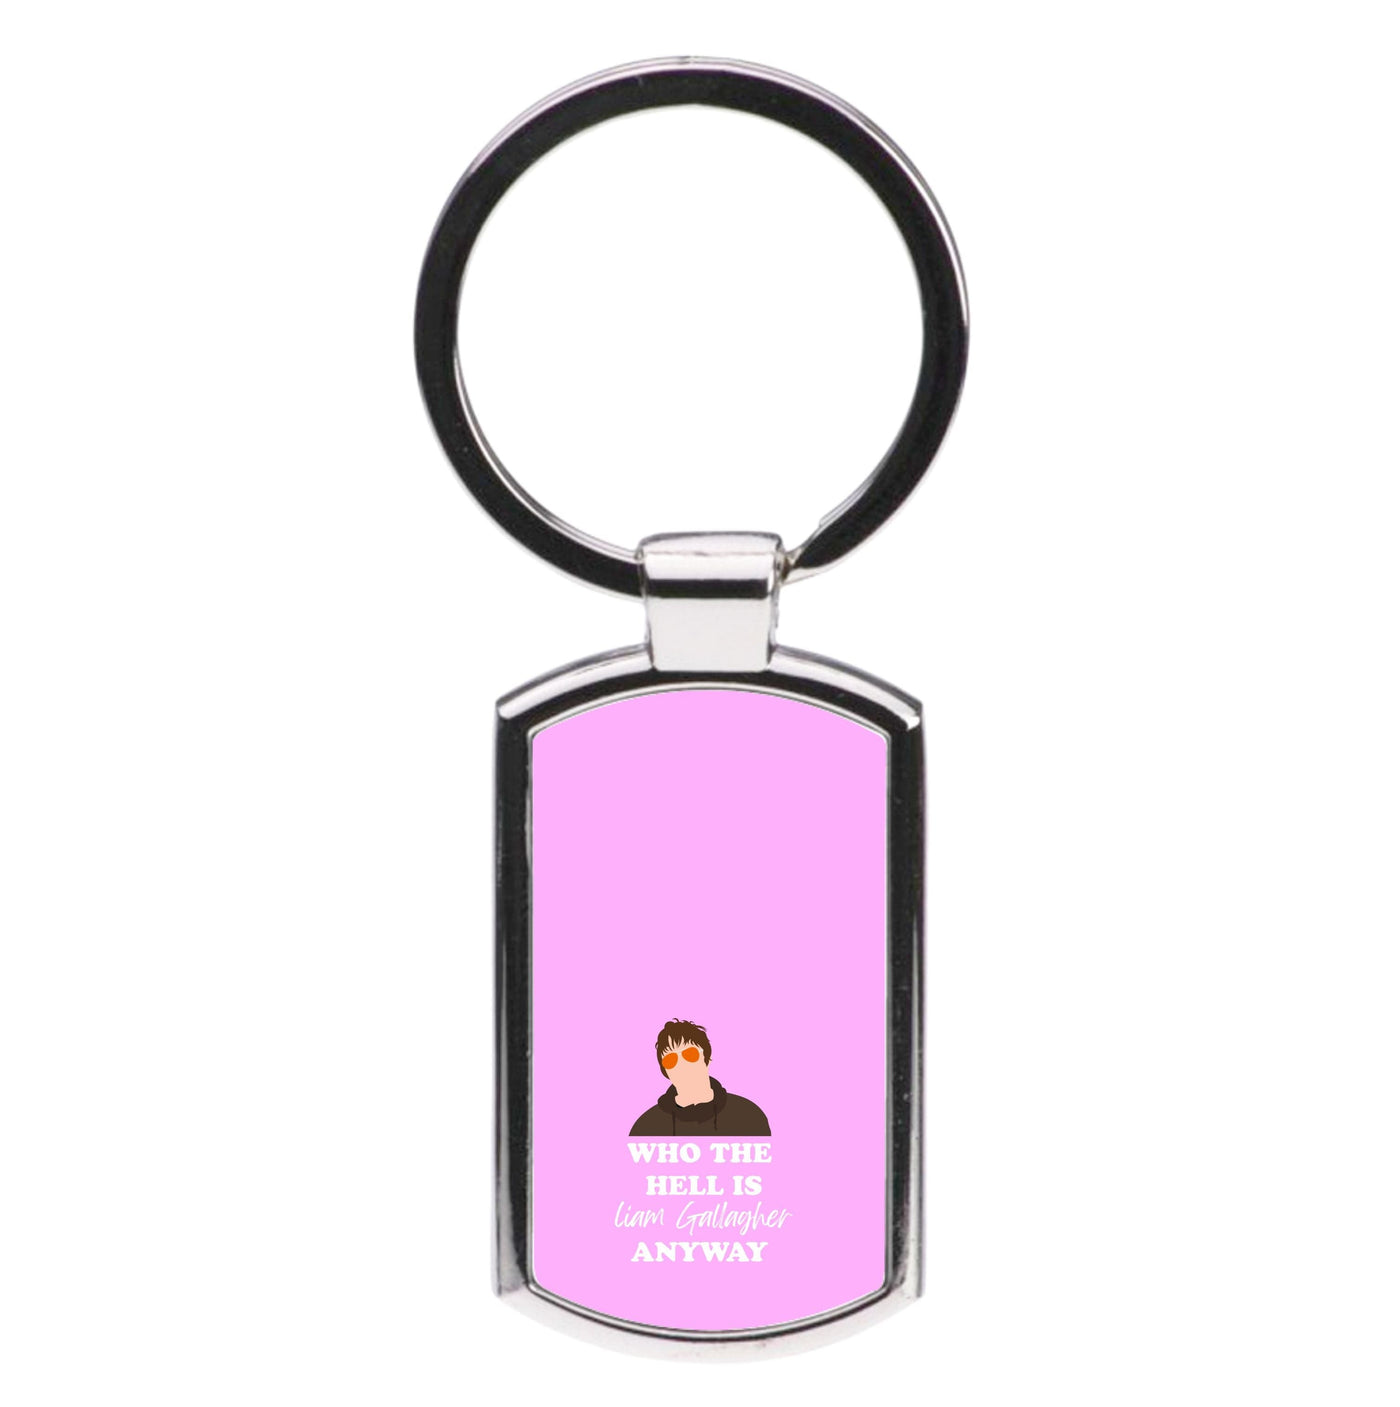 Who The Hell Is Liam Gallagher anyway - Festival Luxury Keyring